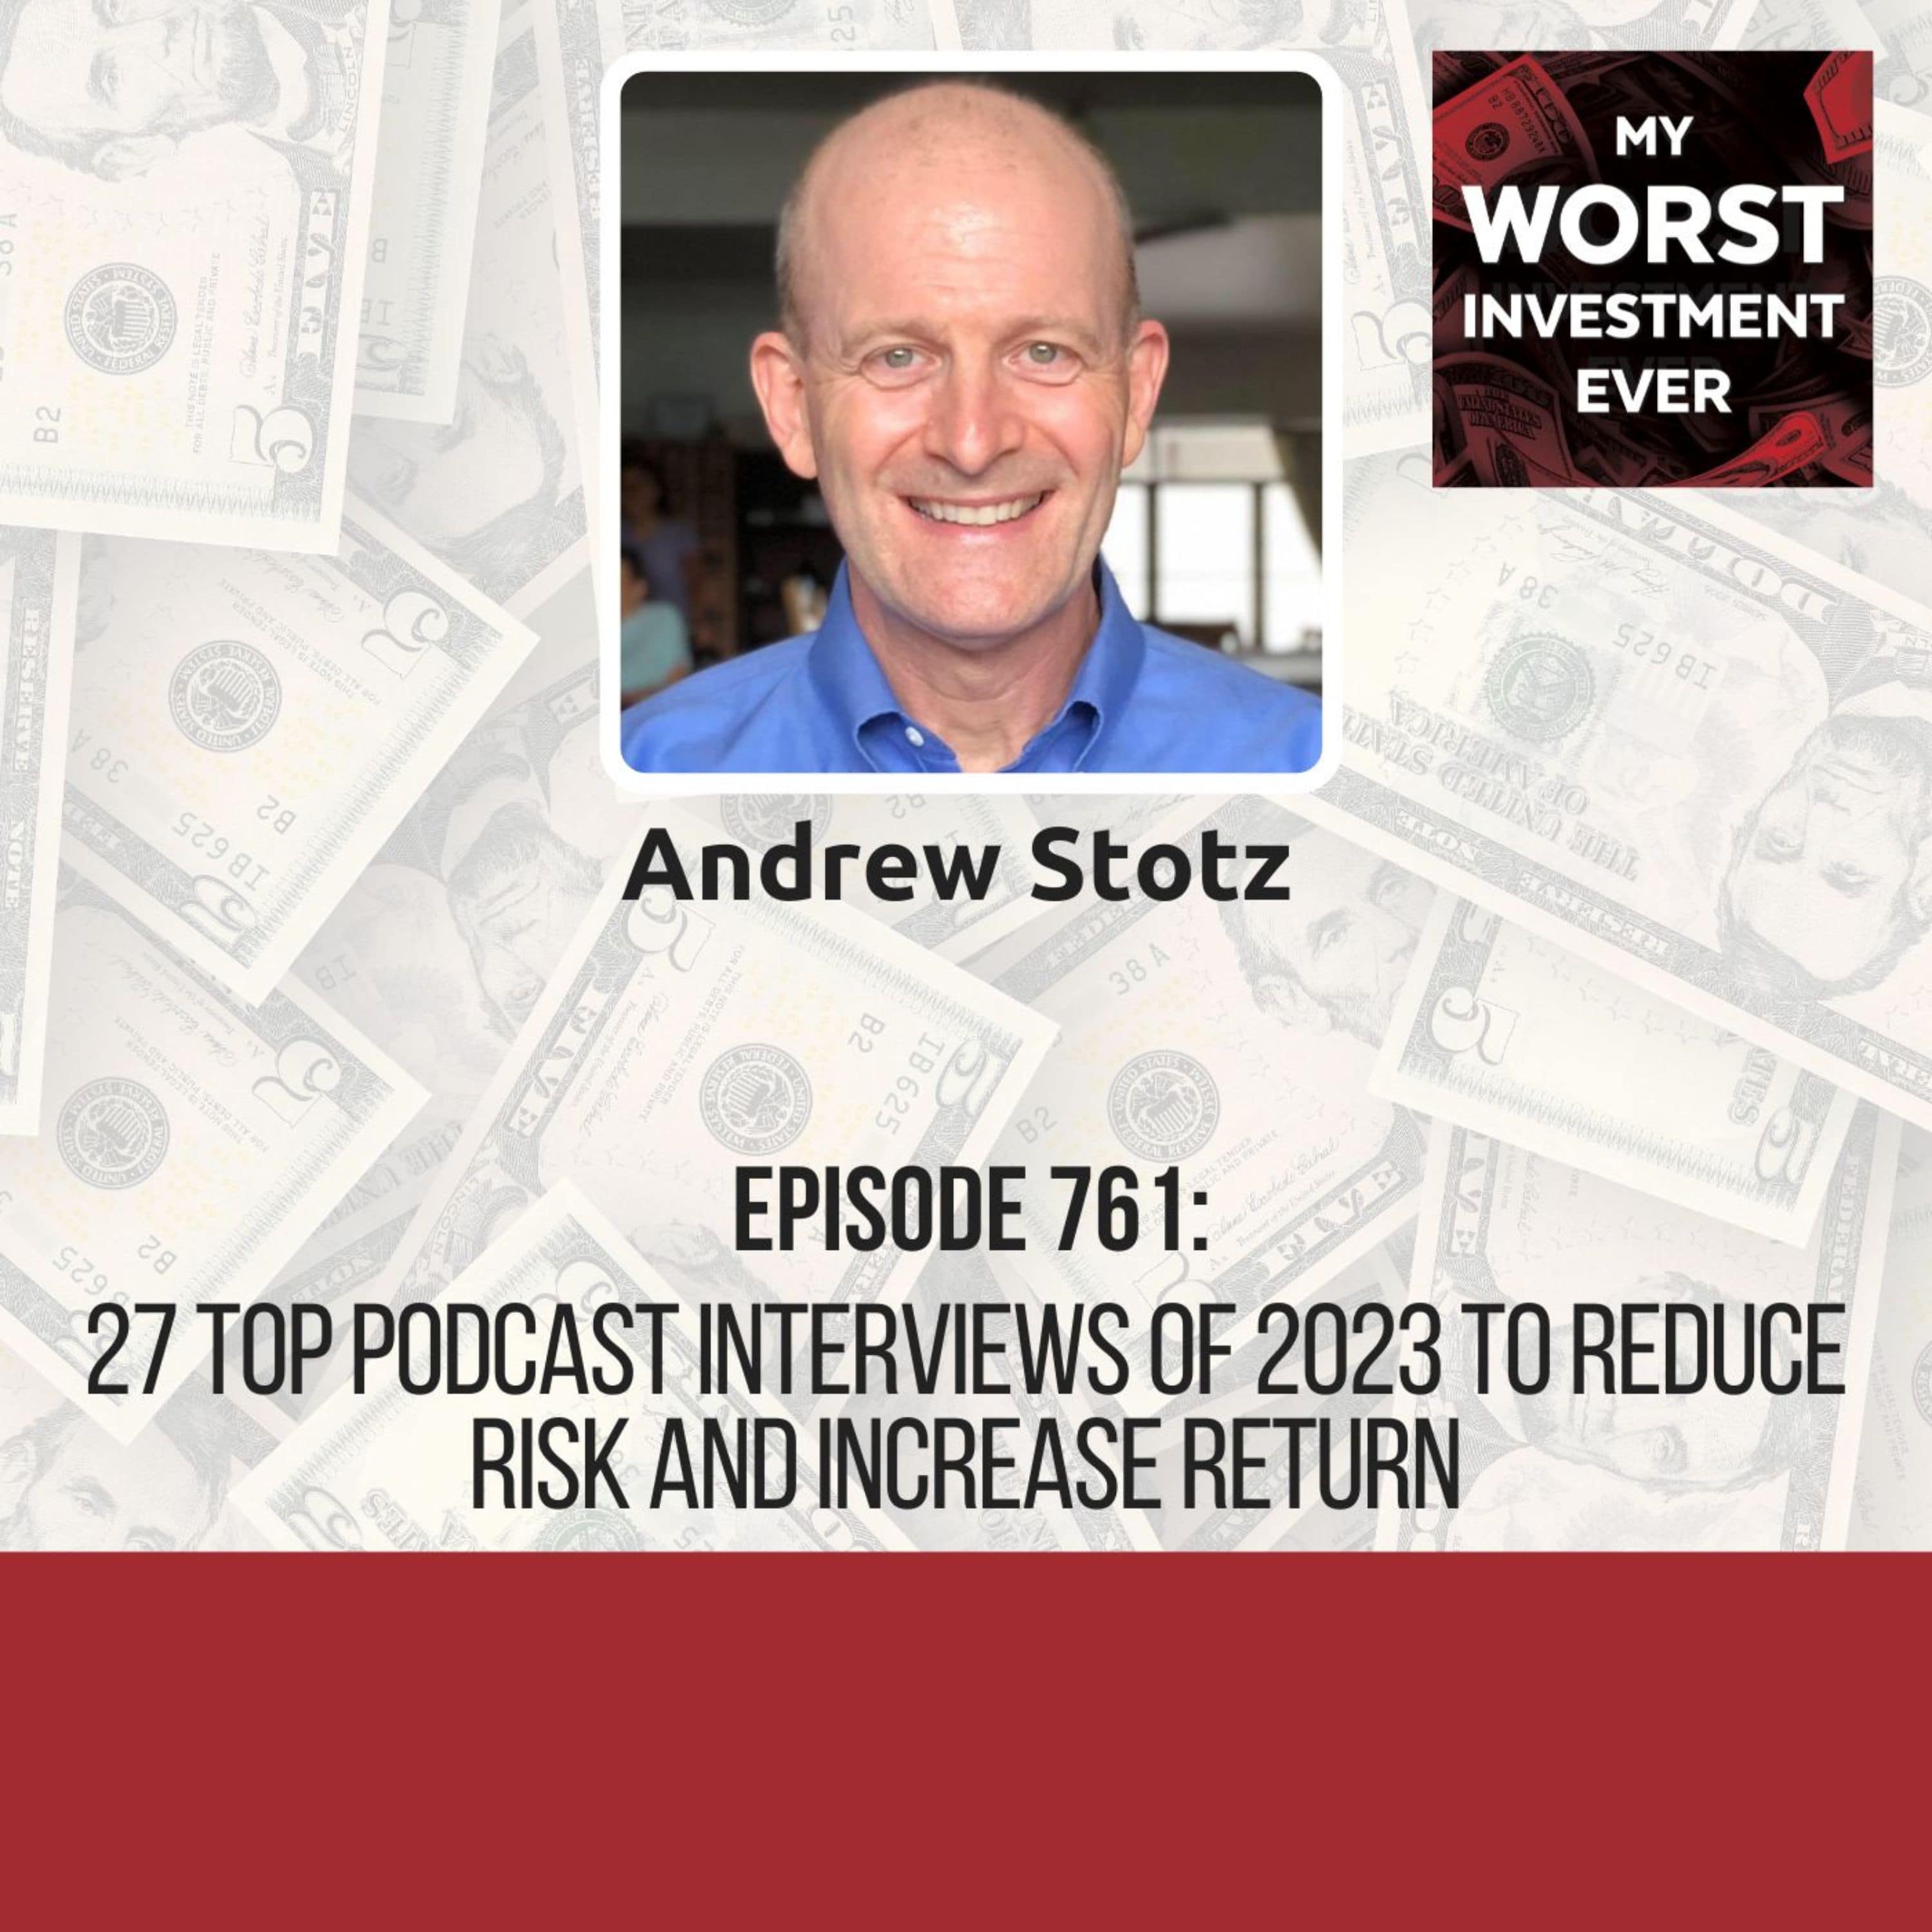 Andrew Stotz - 27 Top Podcast Interviews of 2023 to Reduce Risk and Increase Return